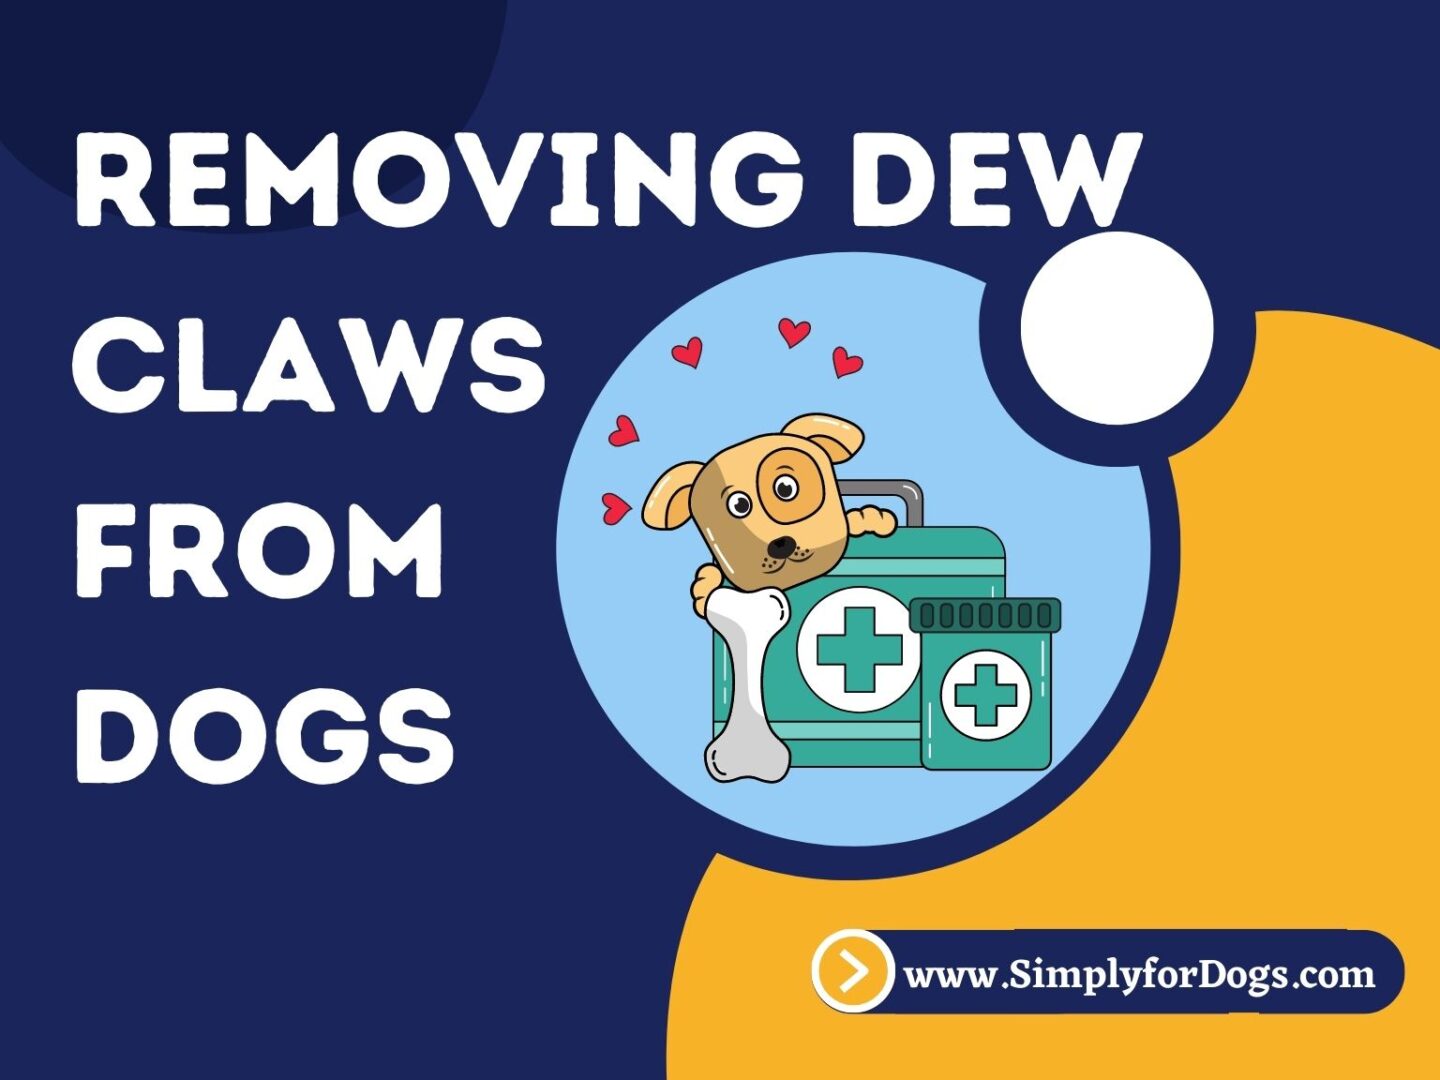 Removing Dew Claws from Dogs